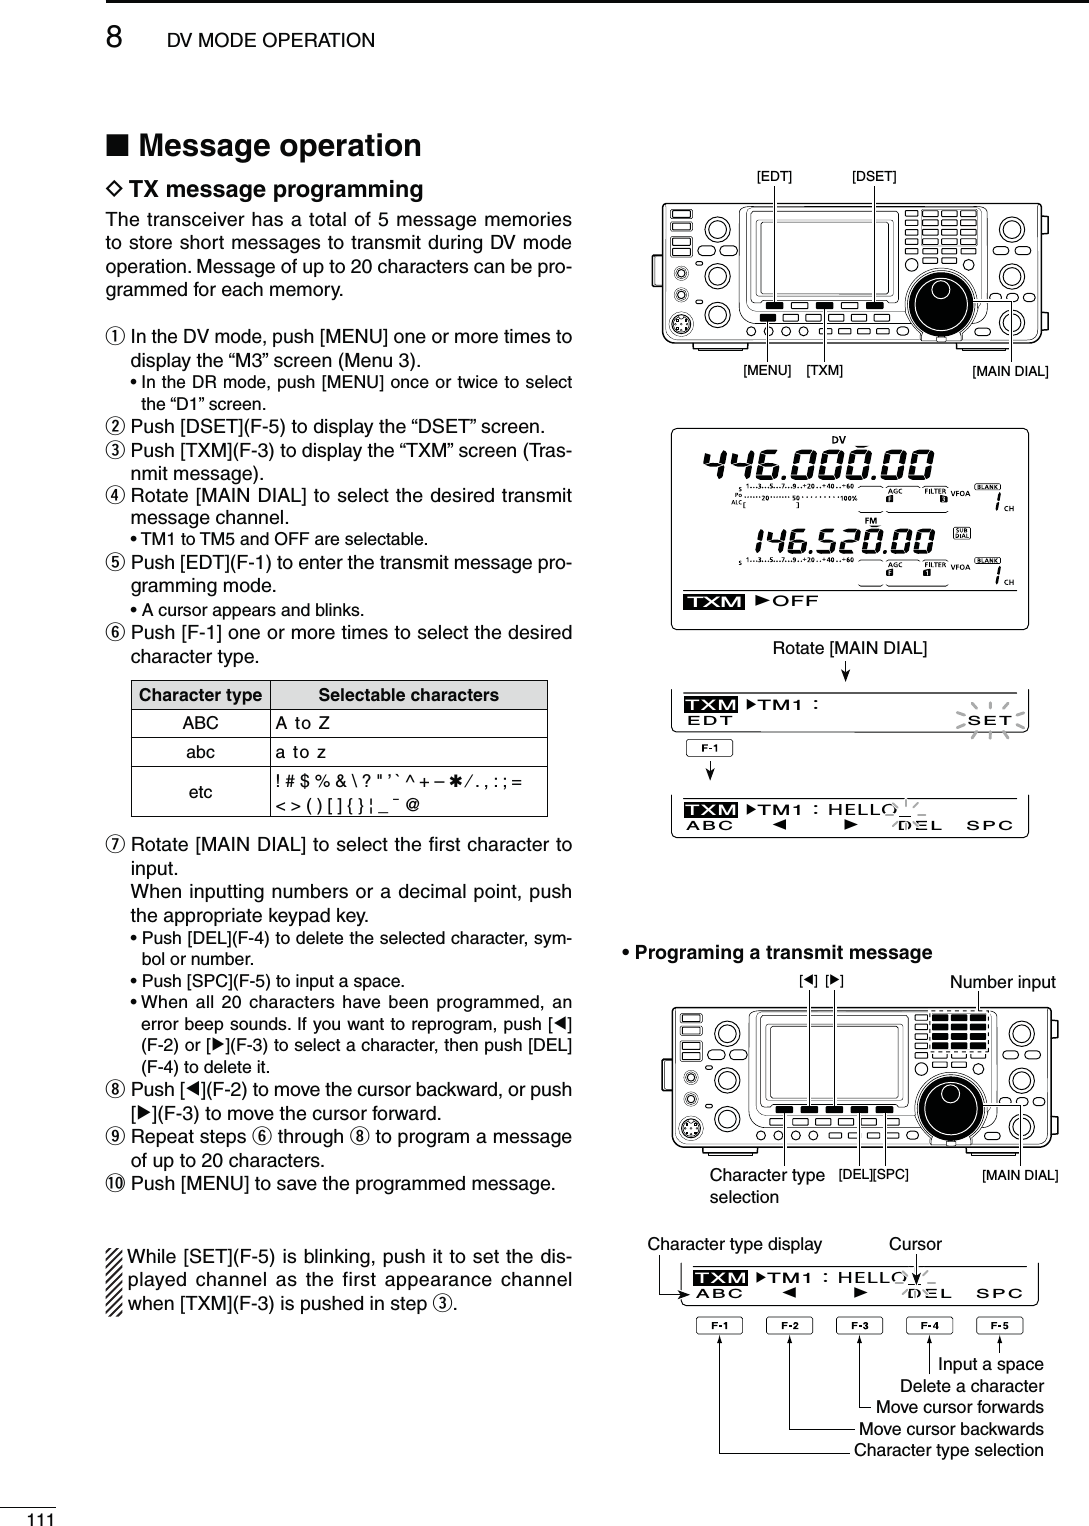 1118DV MODE OPERATIONN-ESSAGEOPERATIOND48MESSAGEPROGRAMMINGThe transceiver has a total of 5 message memories to store short messages to transmit during DV mode operation. Message of up to 20 characters can be pro-grammed for each memory.q  In the DV mode, push [MENU] one or more times to display the “M3” screen (Menu 3). s)NTHE$2MODEPush [MENU] once or twice to select the “D1” screen.w  Push [DSET](F-5) to display the “DSET” screen.e  Push [TXM](F-3) to display the “TXM” screen (Tras-nmit message).r  Rotate [MAIN DIAL] to select the desired transmit message channel. s4-TO4-AND/&amp;&amp;ARESELECTABLEt  Push [EDT](F-1) to enter the transmit message pro-gramming mode. s!CURSORAPPEARSANDBLINKSy  Push [F-1] one or more times to select the desired character type.#HARACTERTYPE 3ELECTABLECHARACTERSABC A to Zabc a to zetc &lt;&quot; ’ ` ^ + – 1b&lt; &gt; ( ) [ ] { } ¦ _ ¯ @u  Rotate [MAIN DIAL] to select the ﬁrst character to input.  When inputting numbers or a decimal point, push the appropriate keypad key. s0USH;$%,=&amp;TODELETETHESELECTEDCHARACTERSYM-bol or number. s0USH;30#=&amp;TOINPUTASPACE s7HENALL CHARACTERSHAVEBEENprogrammed, an error beep sounds. If you want to reprogram, push [Ω](F-2) or [≈](F-3) to select a character, then push [DEL](F-4) to delete it.i  Push [Ω](F-2) to move the cursor backward, or push [≈](F-3) to move the cursor forward.o  Repeat steps y through i to program a message of up to 20 characters.!0  Push [MENU] to save the programmed message.While [SET](F-5) is blinking, push it to set the dis-played channel as the first appearance channel when [TXM](F-3) is pushed in step e.TXMOFFTXMTM1：EDT SETABCTXMTM1：HELLODEL SPC[MAIN DIAL][MENU] [TXM][DSET][EDT]Rotate [MAIN DIAL]ABCTXMTM1：HELLODEL SPCCharacter type display Cursor[][][DEL][SPC] [MAIN DIAL]Number input Character type selections0ROGRAMINGATRANSMITMESSAGEInput a spaceDelete a characterMove cursor forwardsMove cursor backwardsCharacter type selection